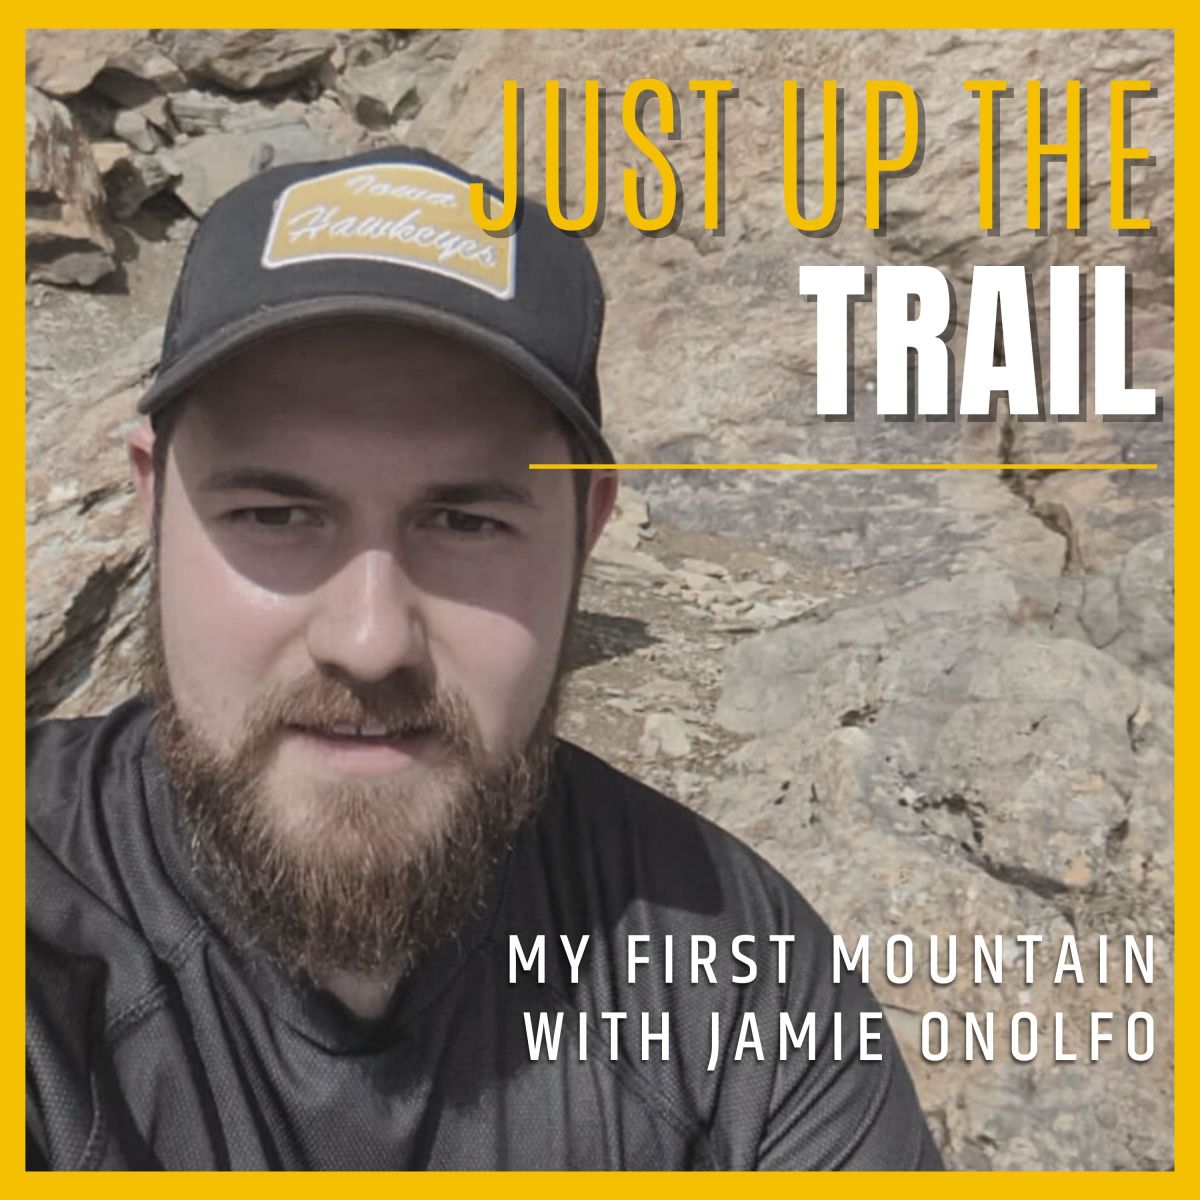 My first Mountain with Jamie Onolfo